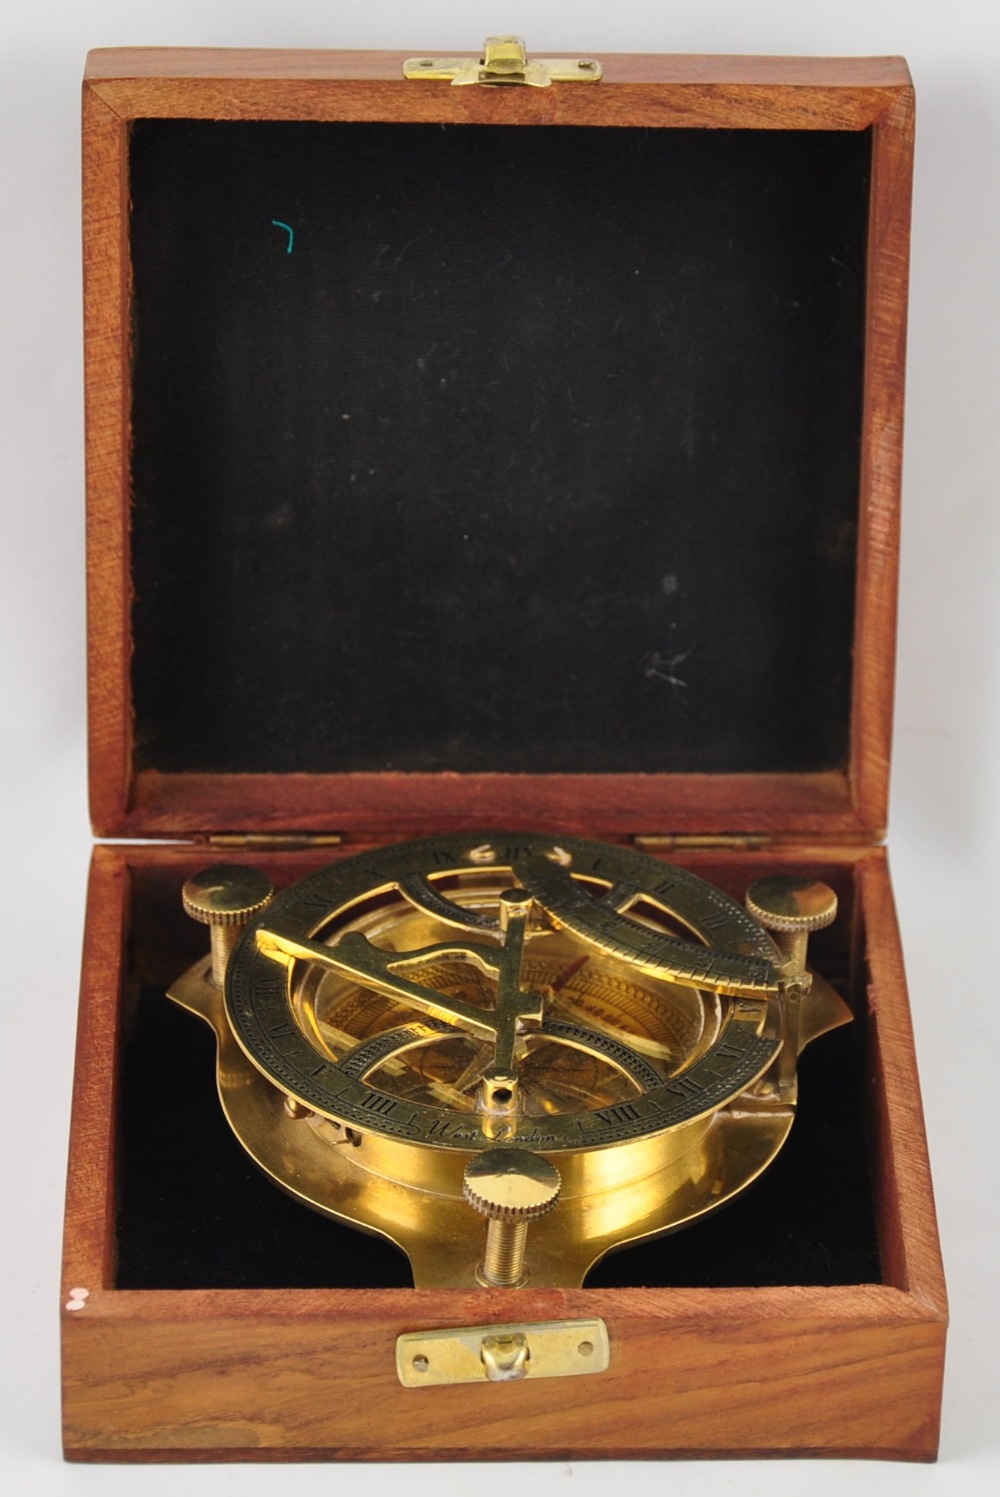 A large brass compass with astronomical instrument in a wooden box